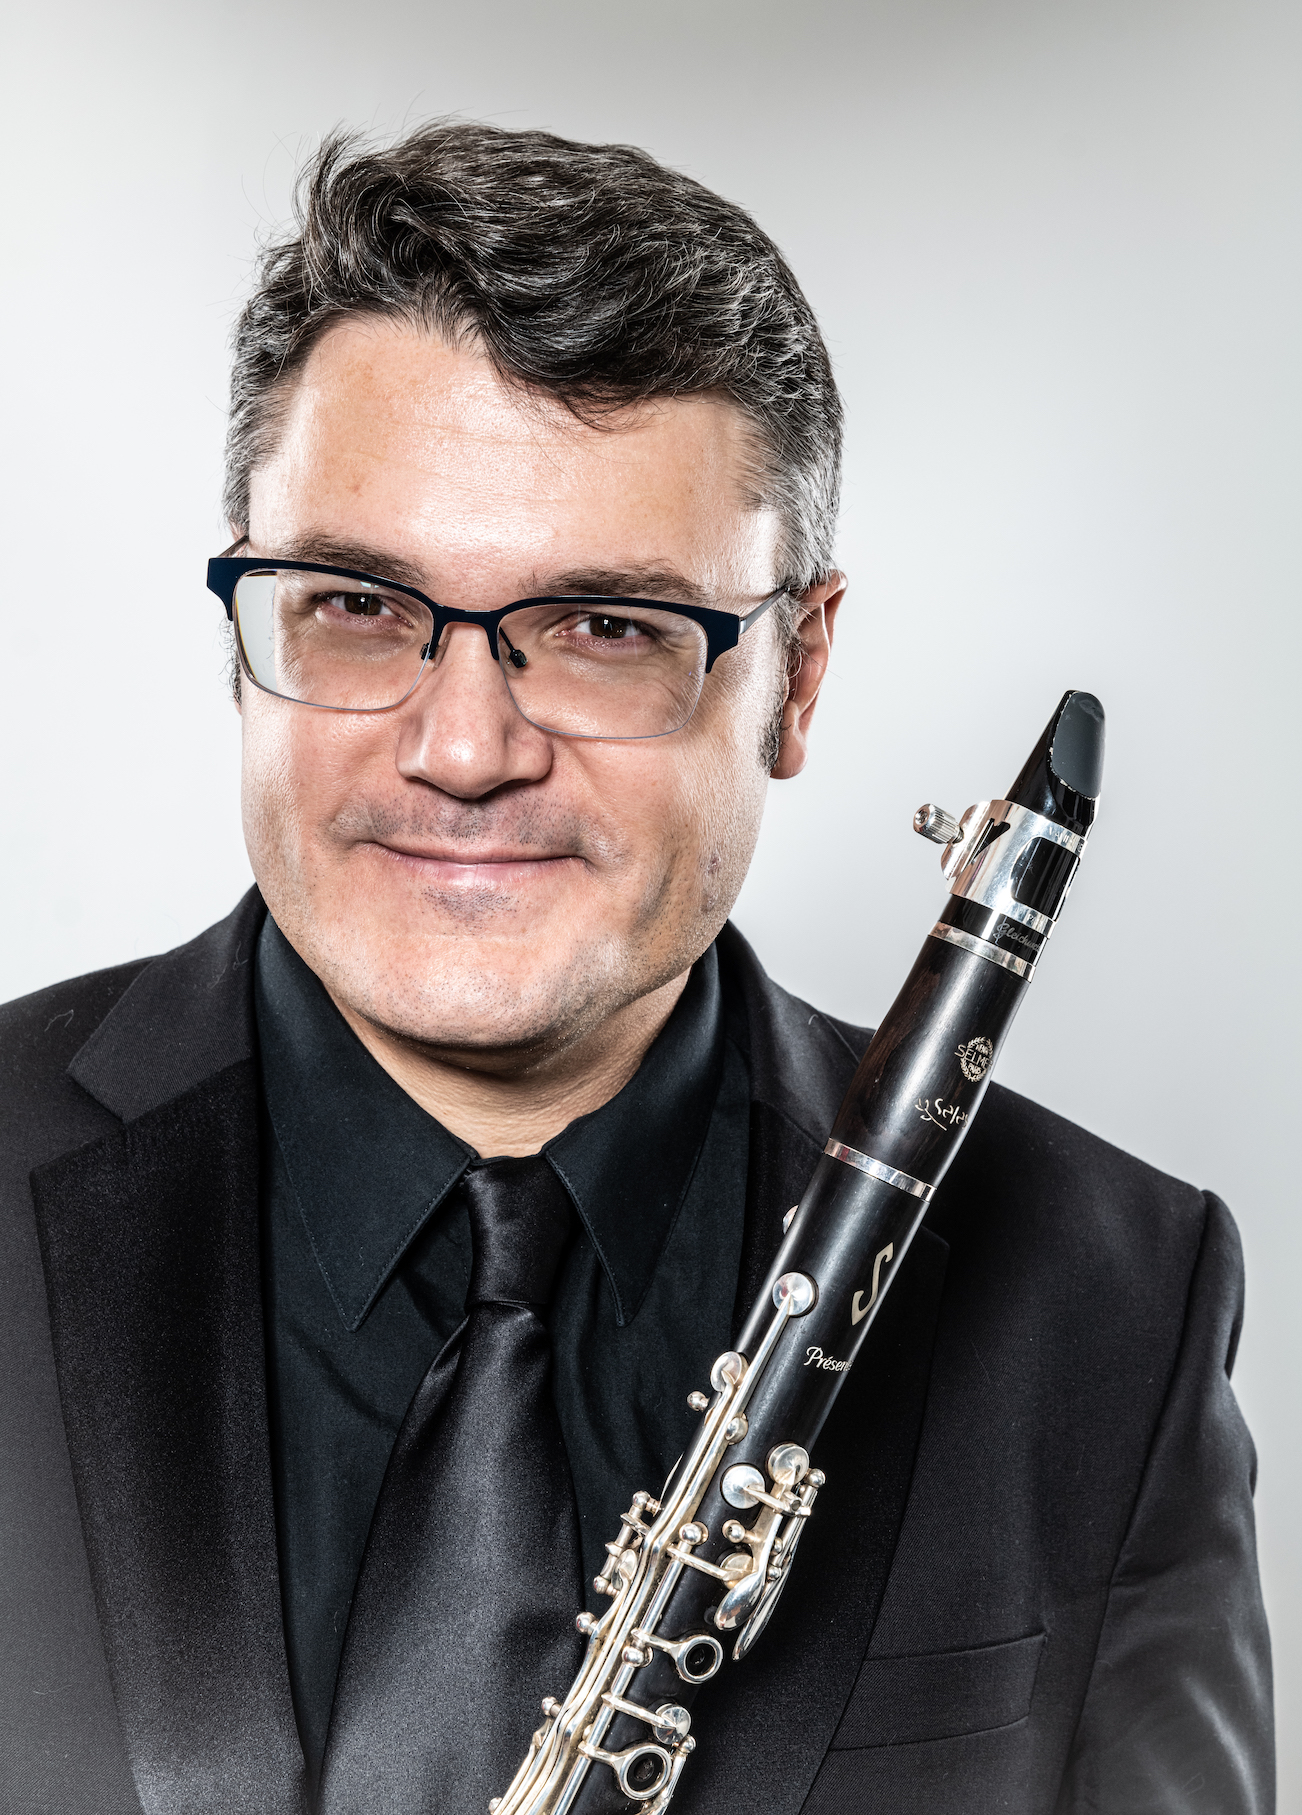 A clarinetist attired in concert black posing in front of a light gray background while holding their instrument.